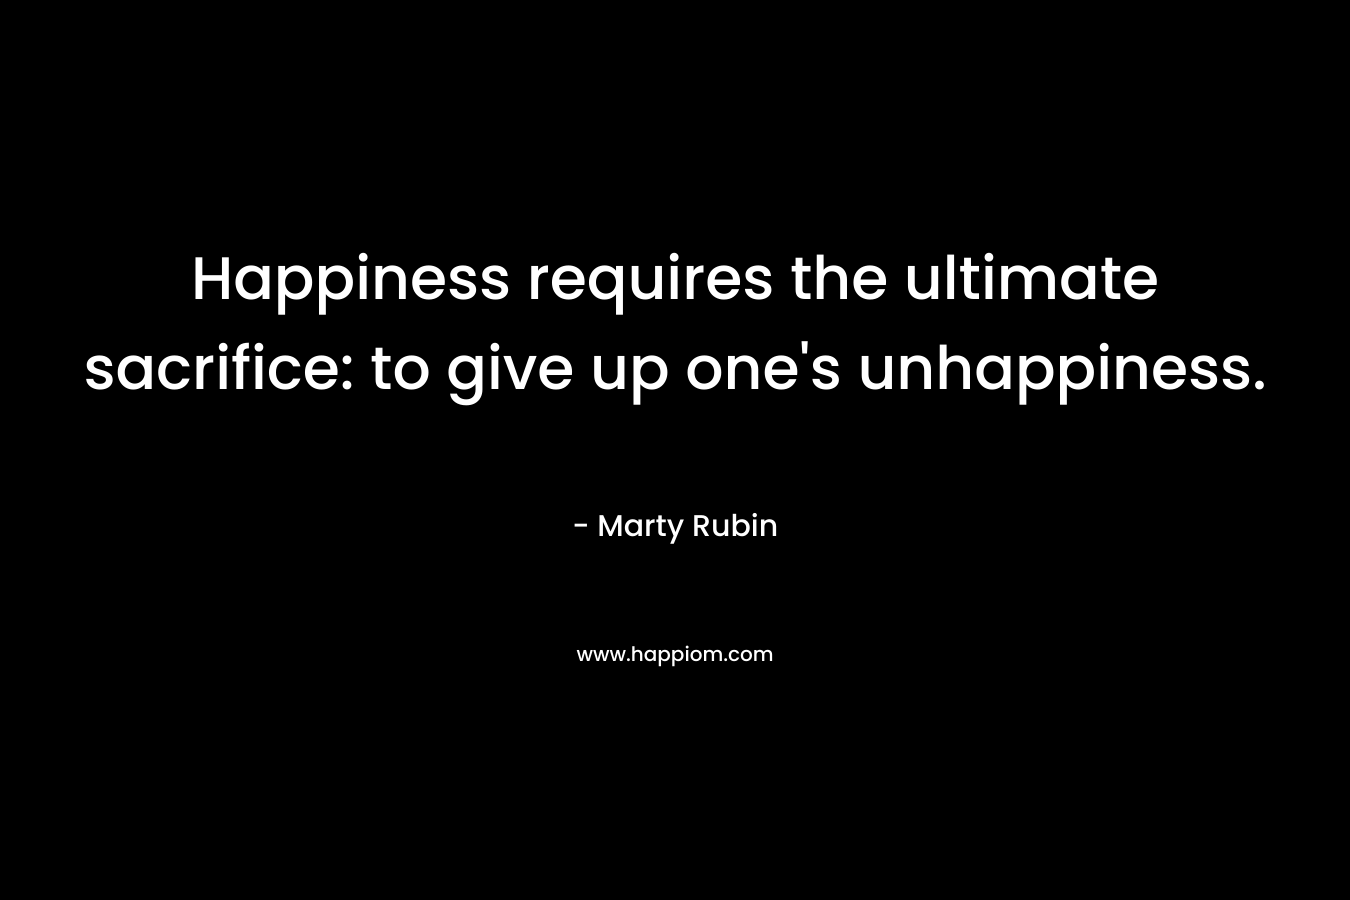 Happiness requires the ultimate sacrifice: to give up one’s unhappiness. – Marty Rubin